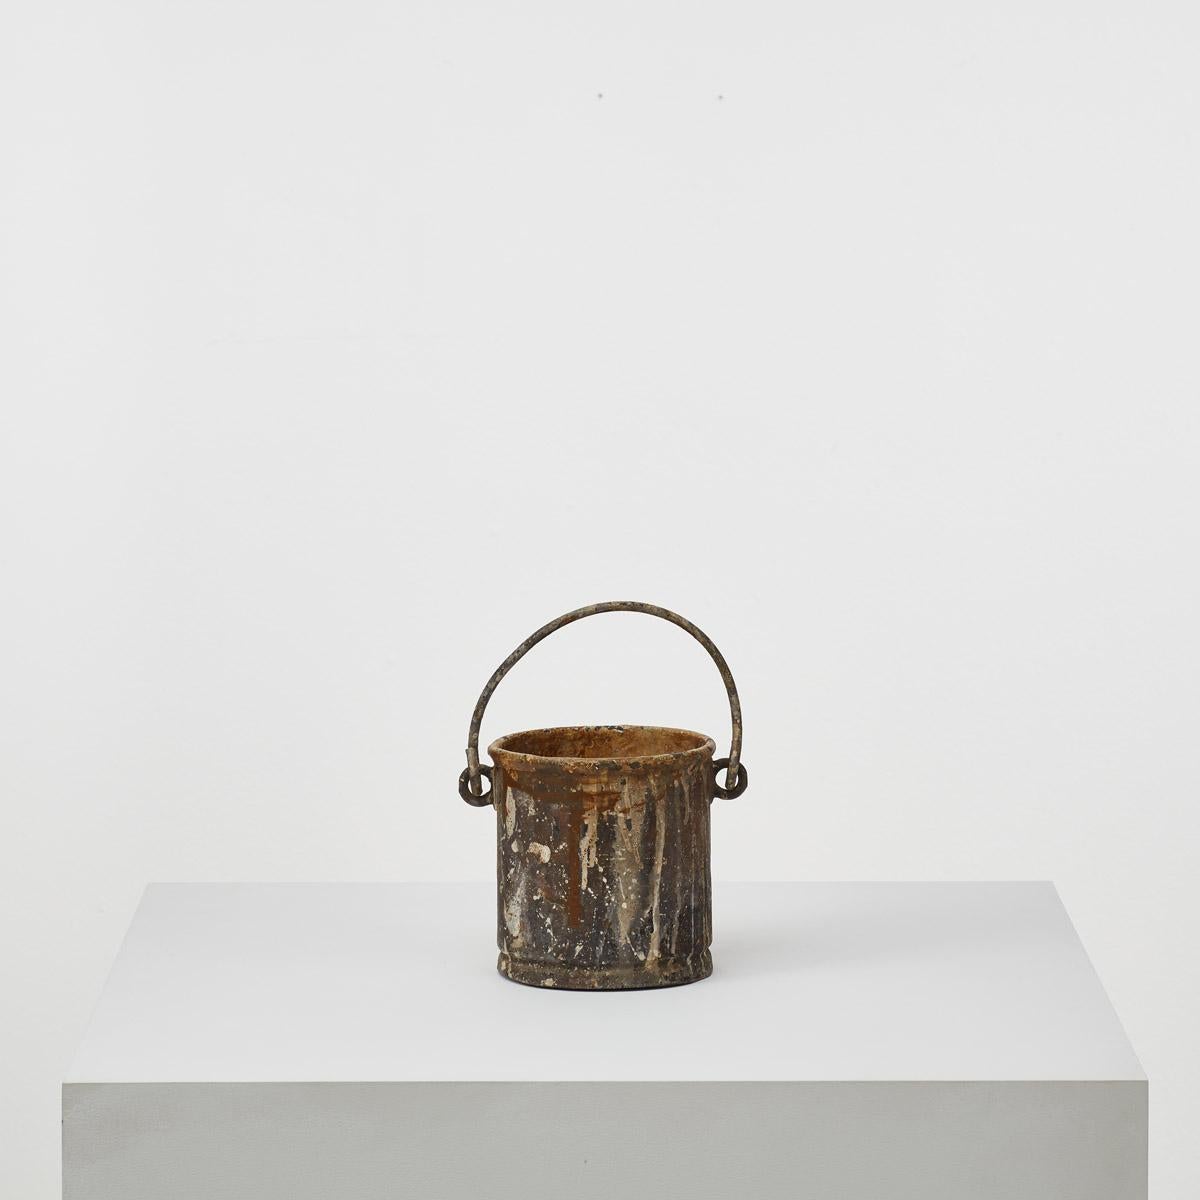 A cherished artefact. This early 20th Century antique artist’s paint pot is a nostalgic relic from a time when traditional tools fuelled artistic expression. Crafted from metal, the pot has withstood the test of time and bears marks and dints in